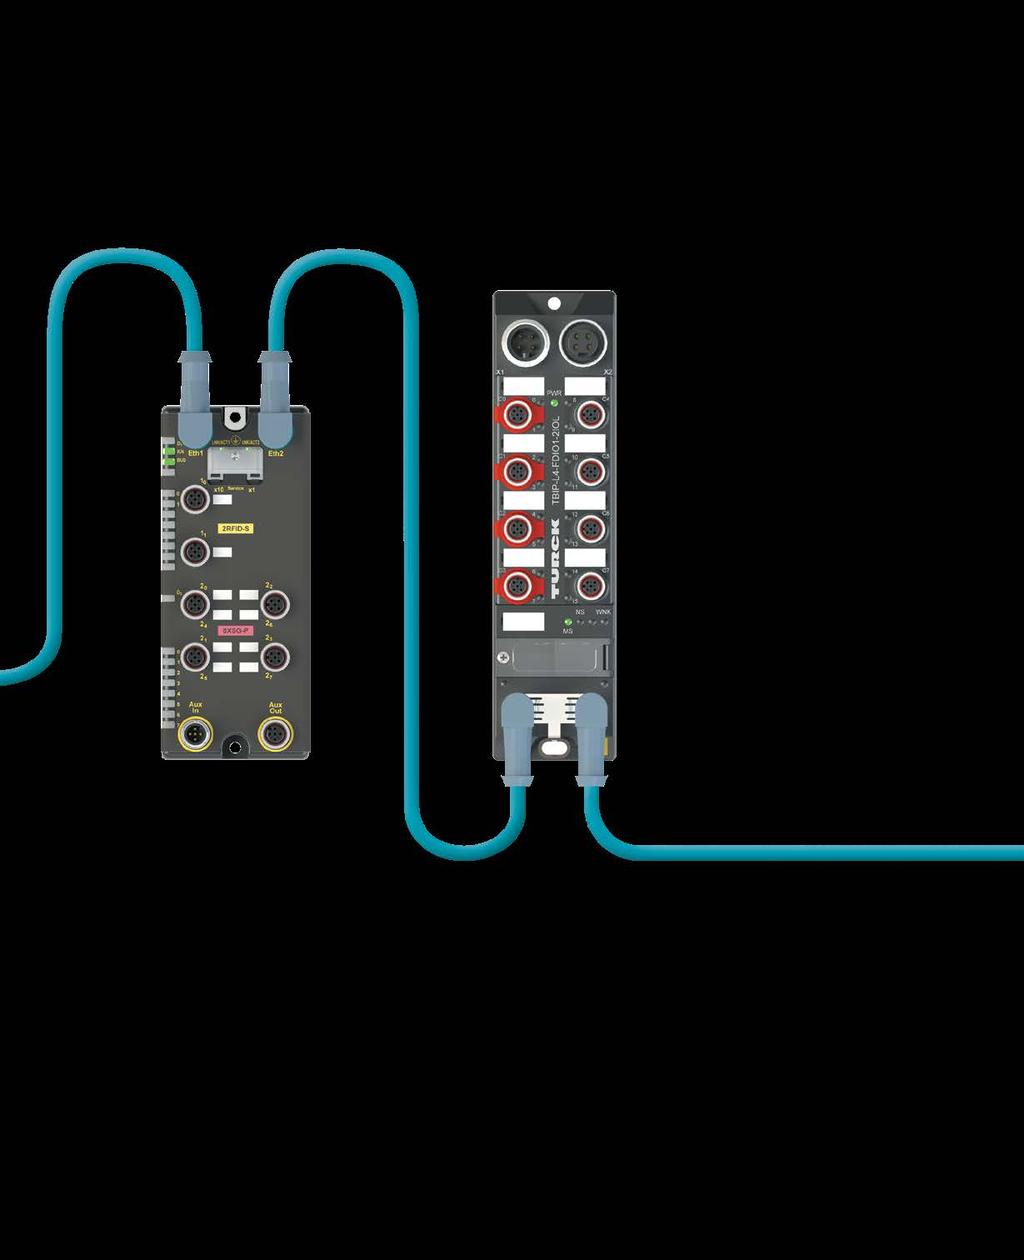 T Safety Solutions - Hybrid Modules Available for PROFIsafe (PROFINET) and CIP Safety (Ethernet/IP) Flexible Hybrid combination of safety and